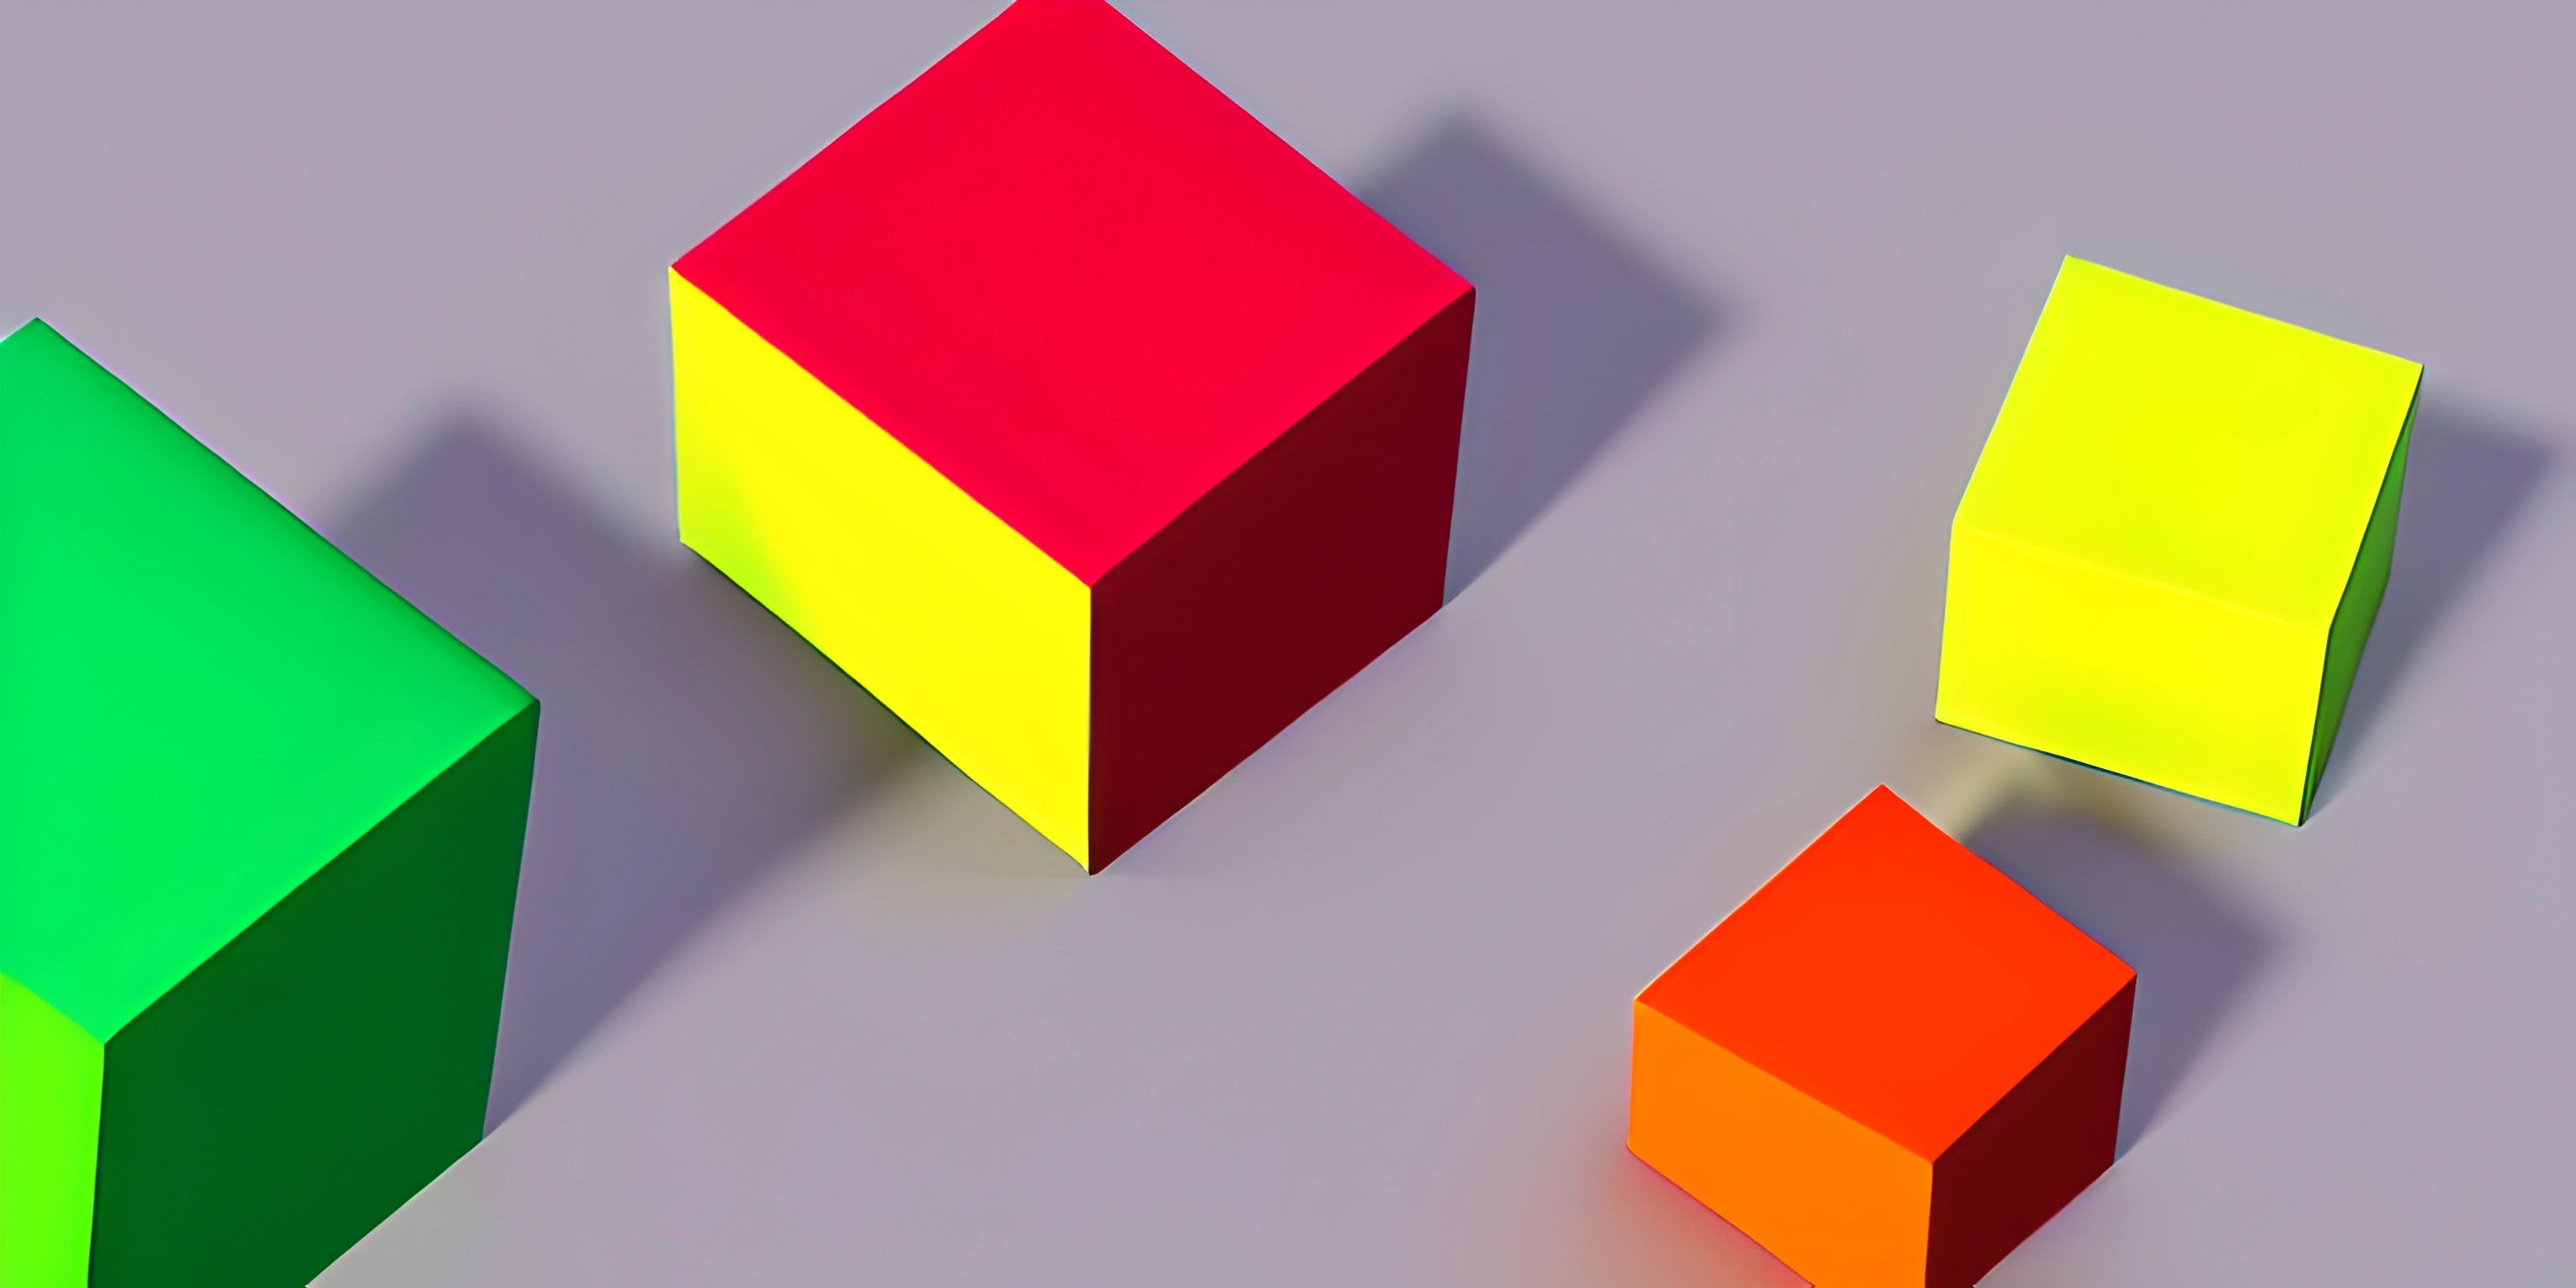 3d illustration of various bright colored cubes scattered together on grey surface with shadow in center